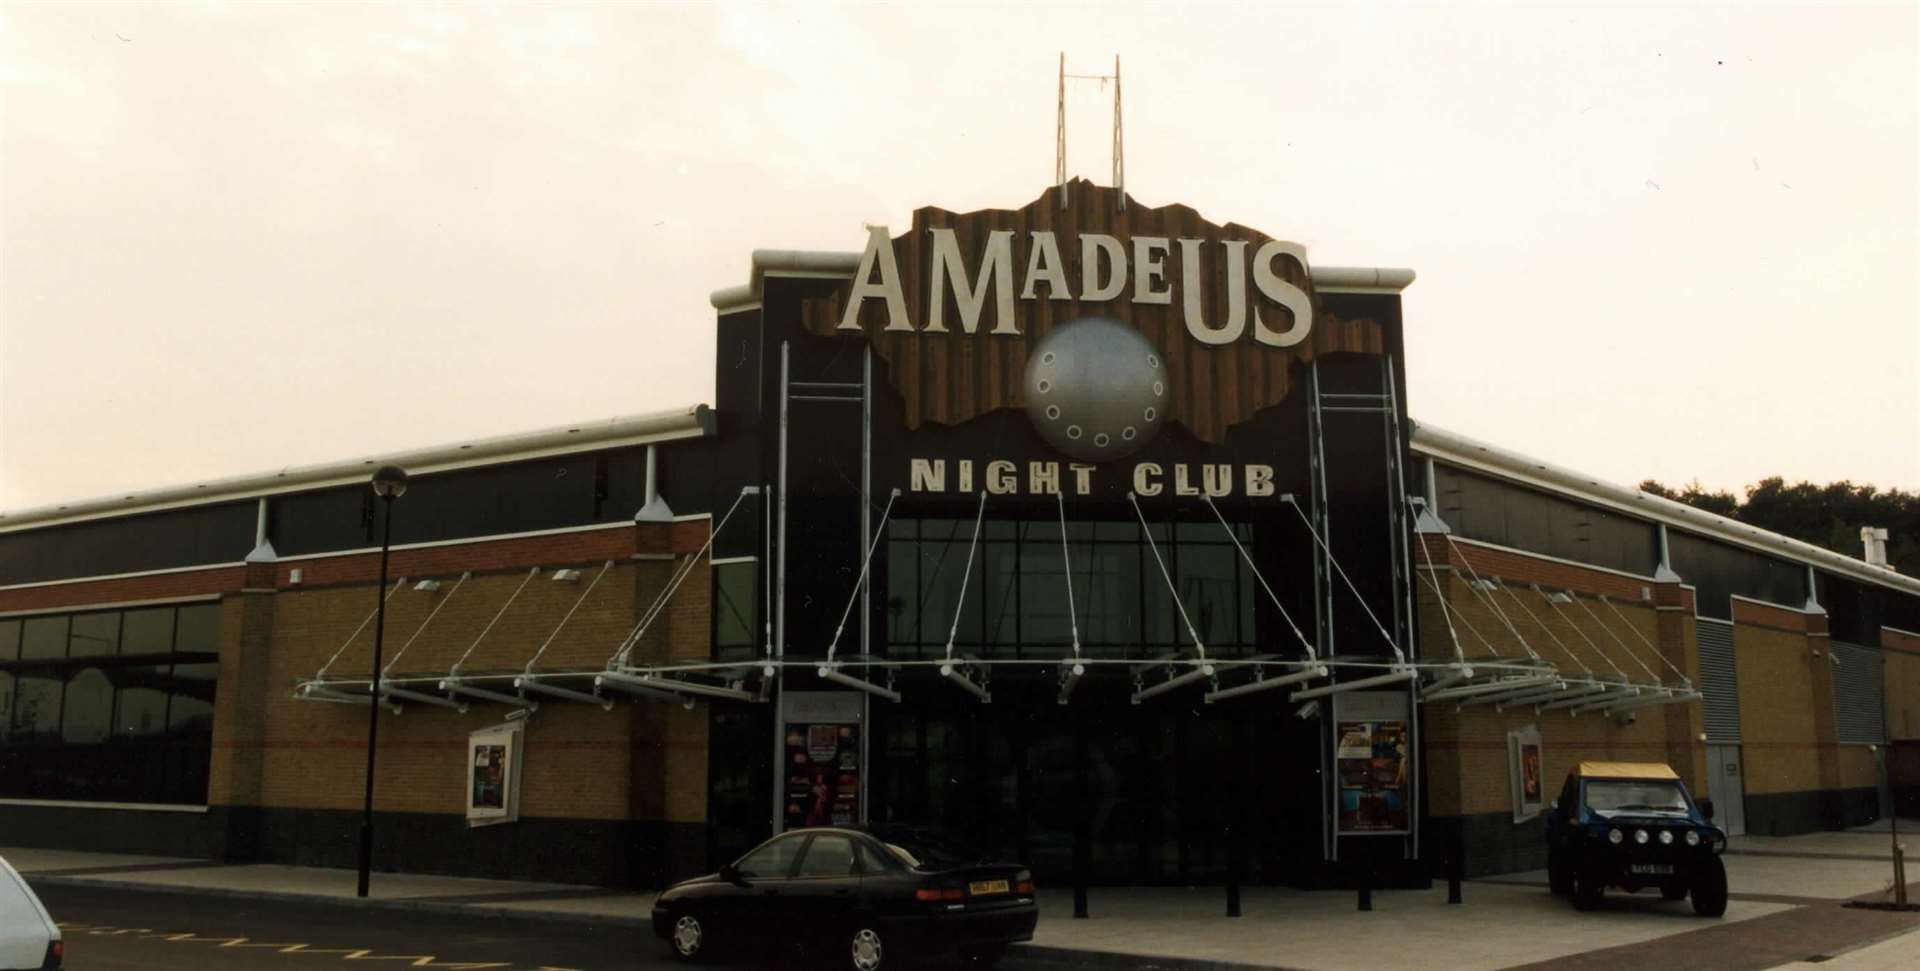 Amadeus nightclub opened in Rochester in 1997. It was later renamed Passion and sadly closed for good in the summer of 2011. It is now a Hollywood Bowl.